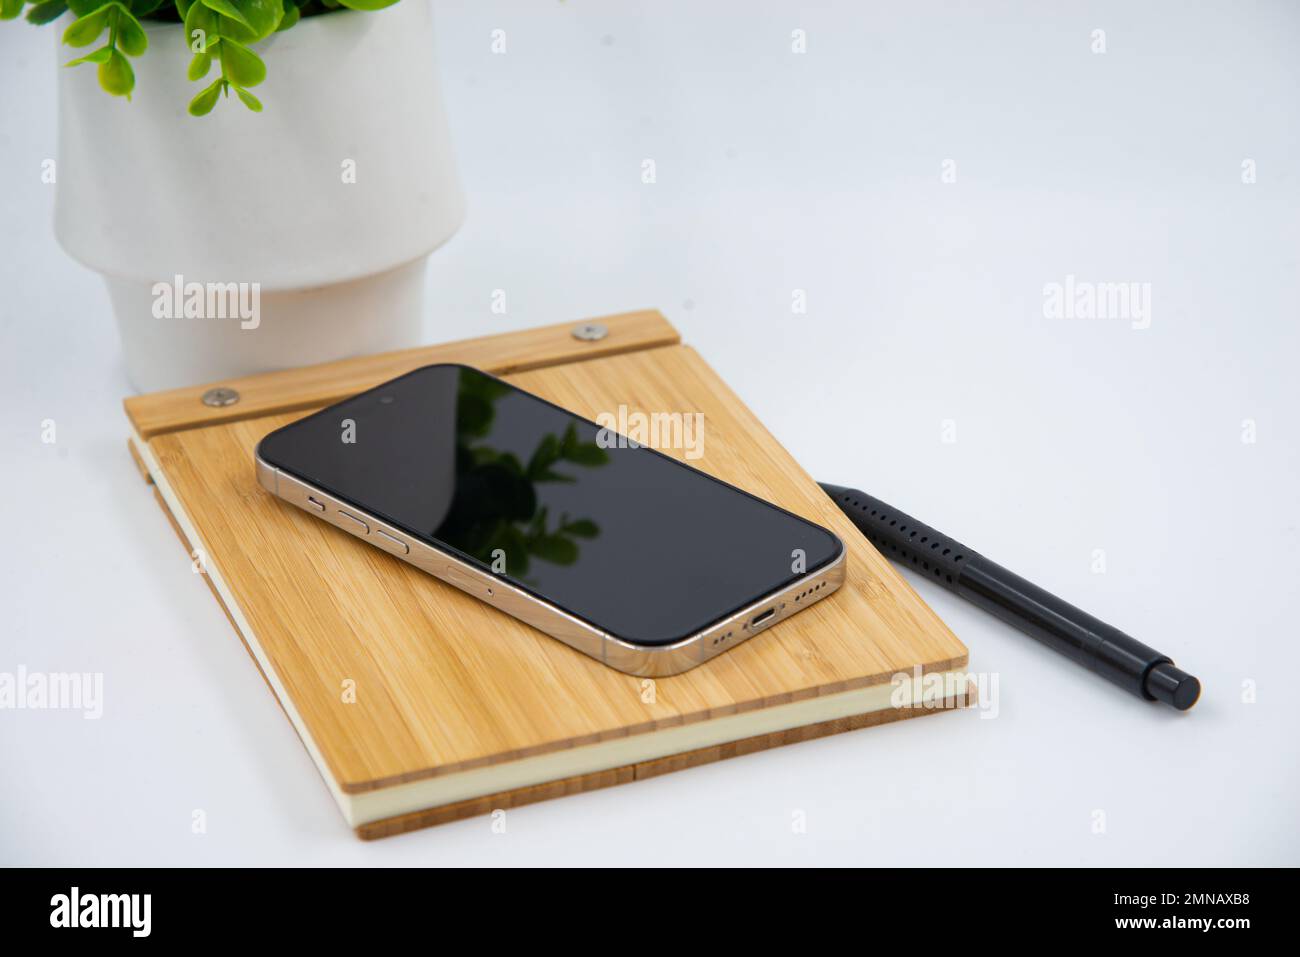 Mobile smart phone with blank screen of gadget on notebook. Digital cell phone with copy space area on white background with pencil and leaf Stock Photo